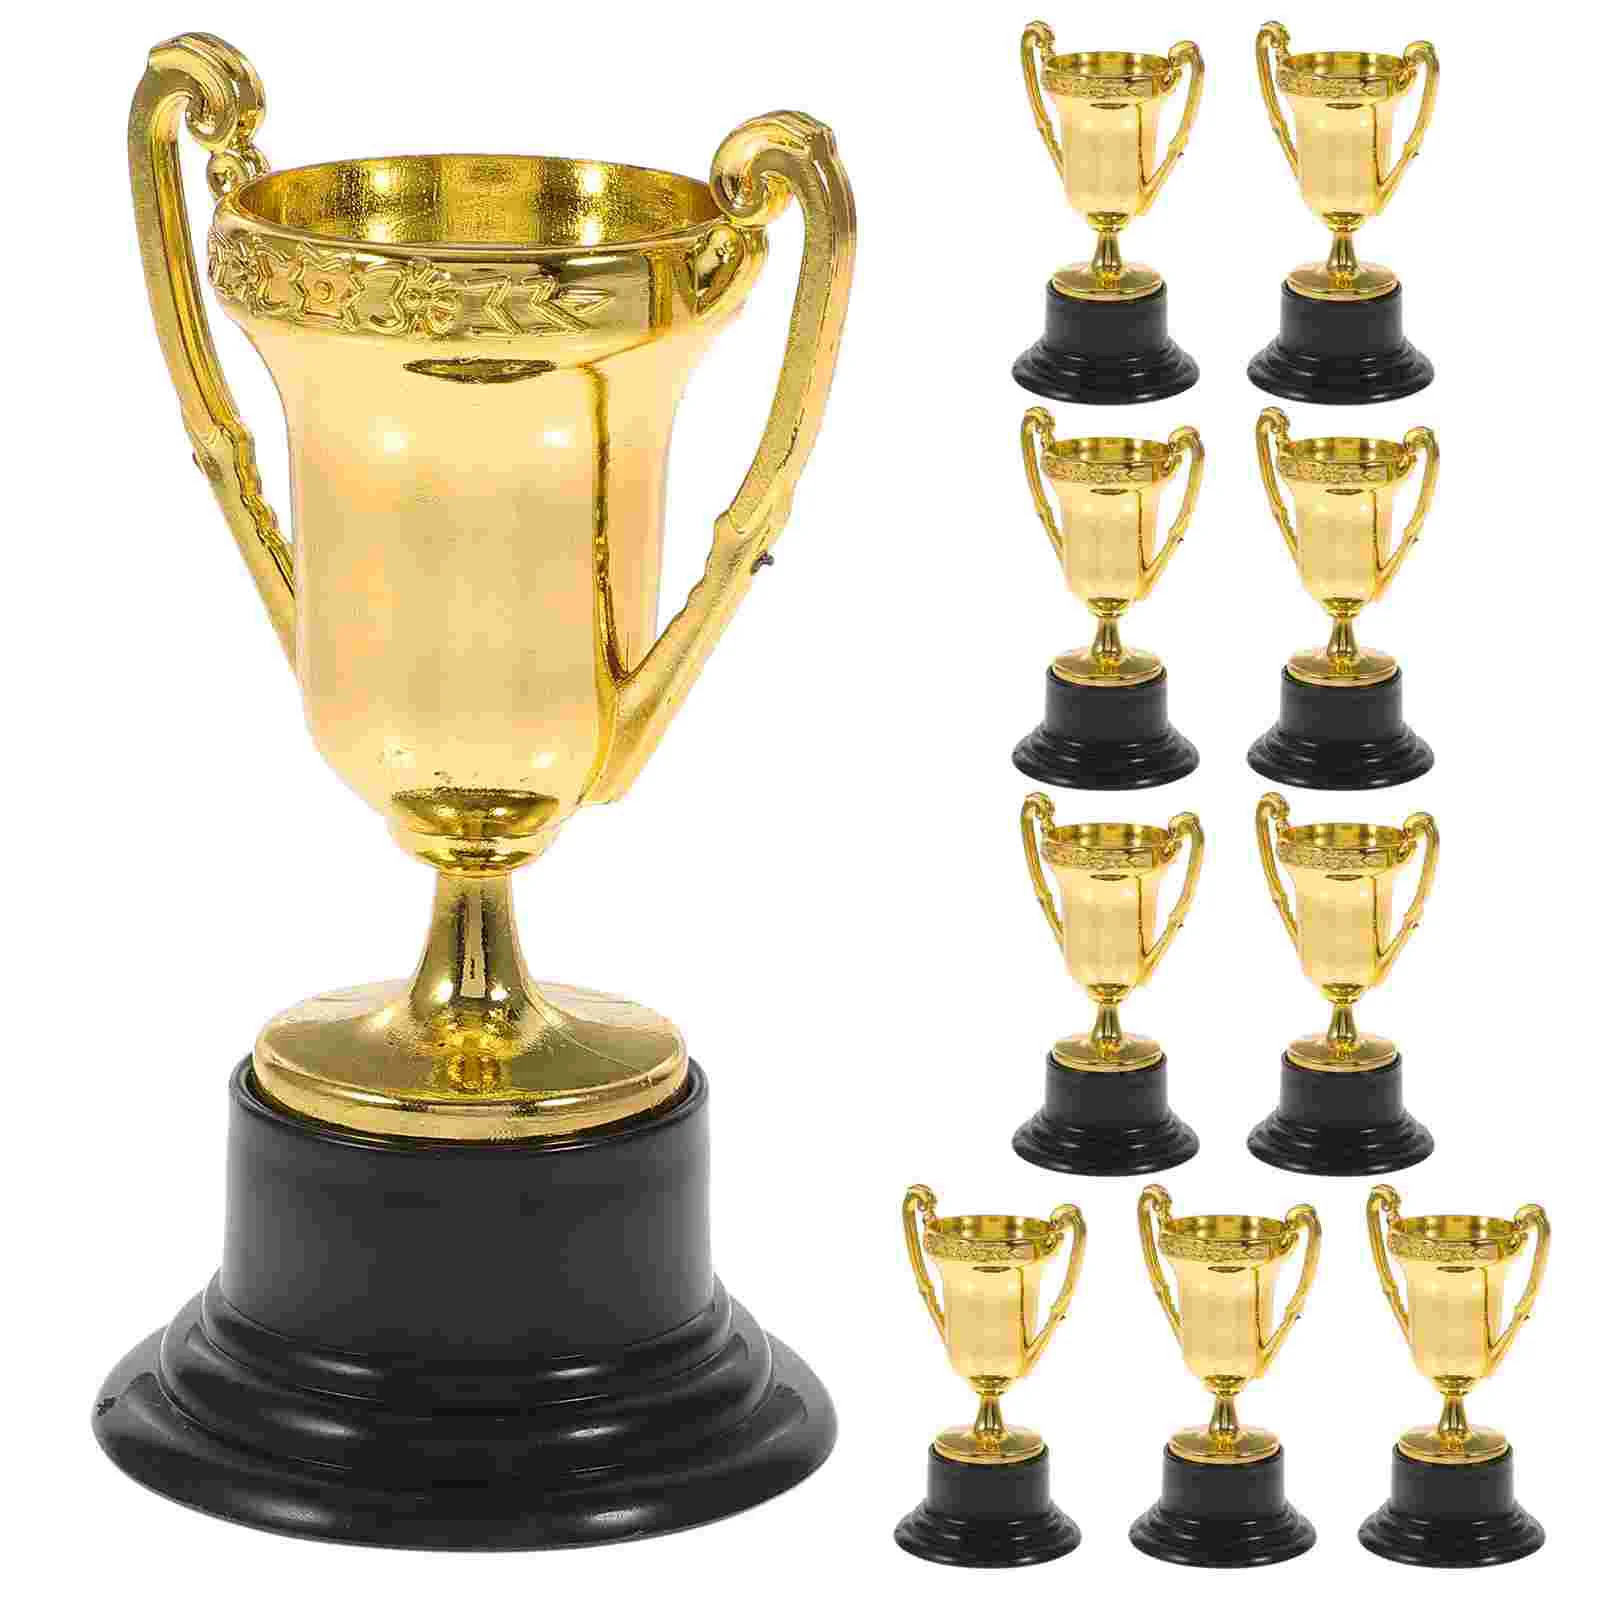 

Trophies Trophy Kids Award Mini Cup Awards Gold Winner Children Cups Party Learning Early Soccer Toy Favors Golden Medals Prizes